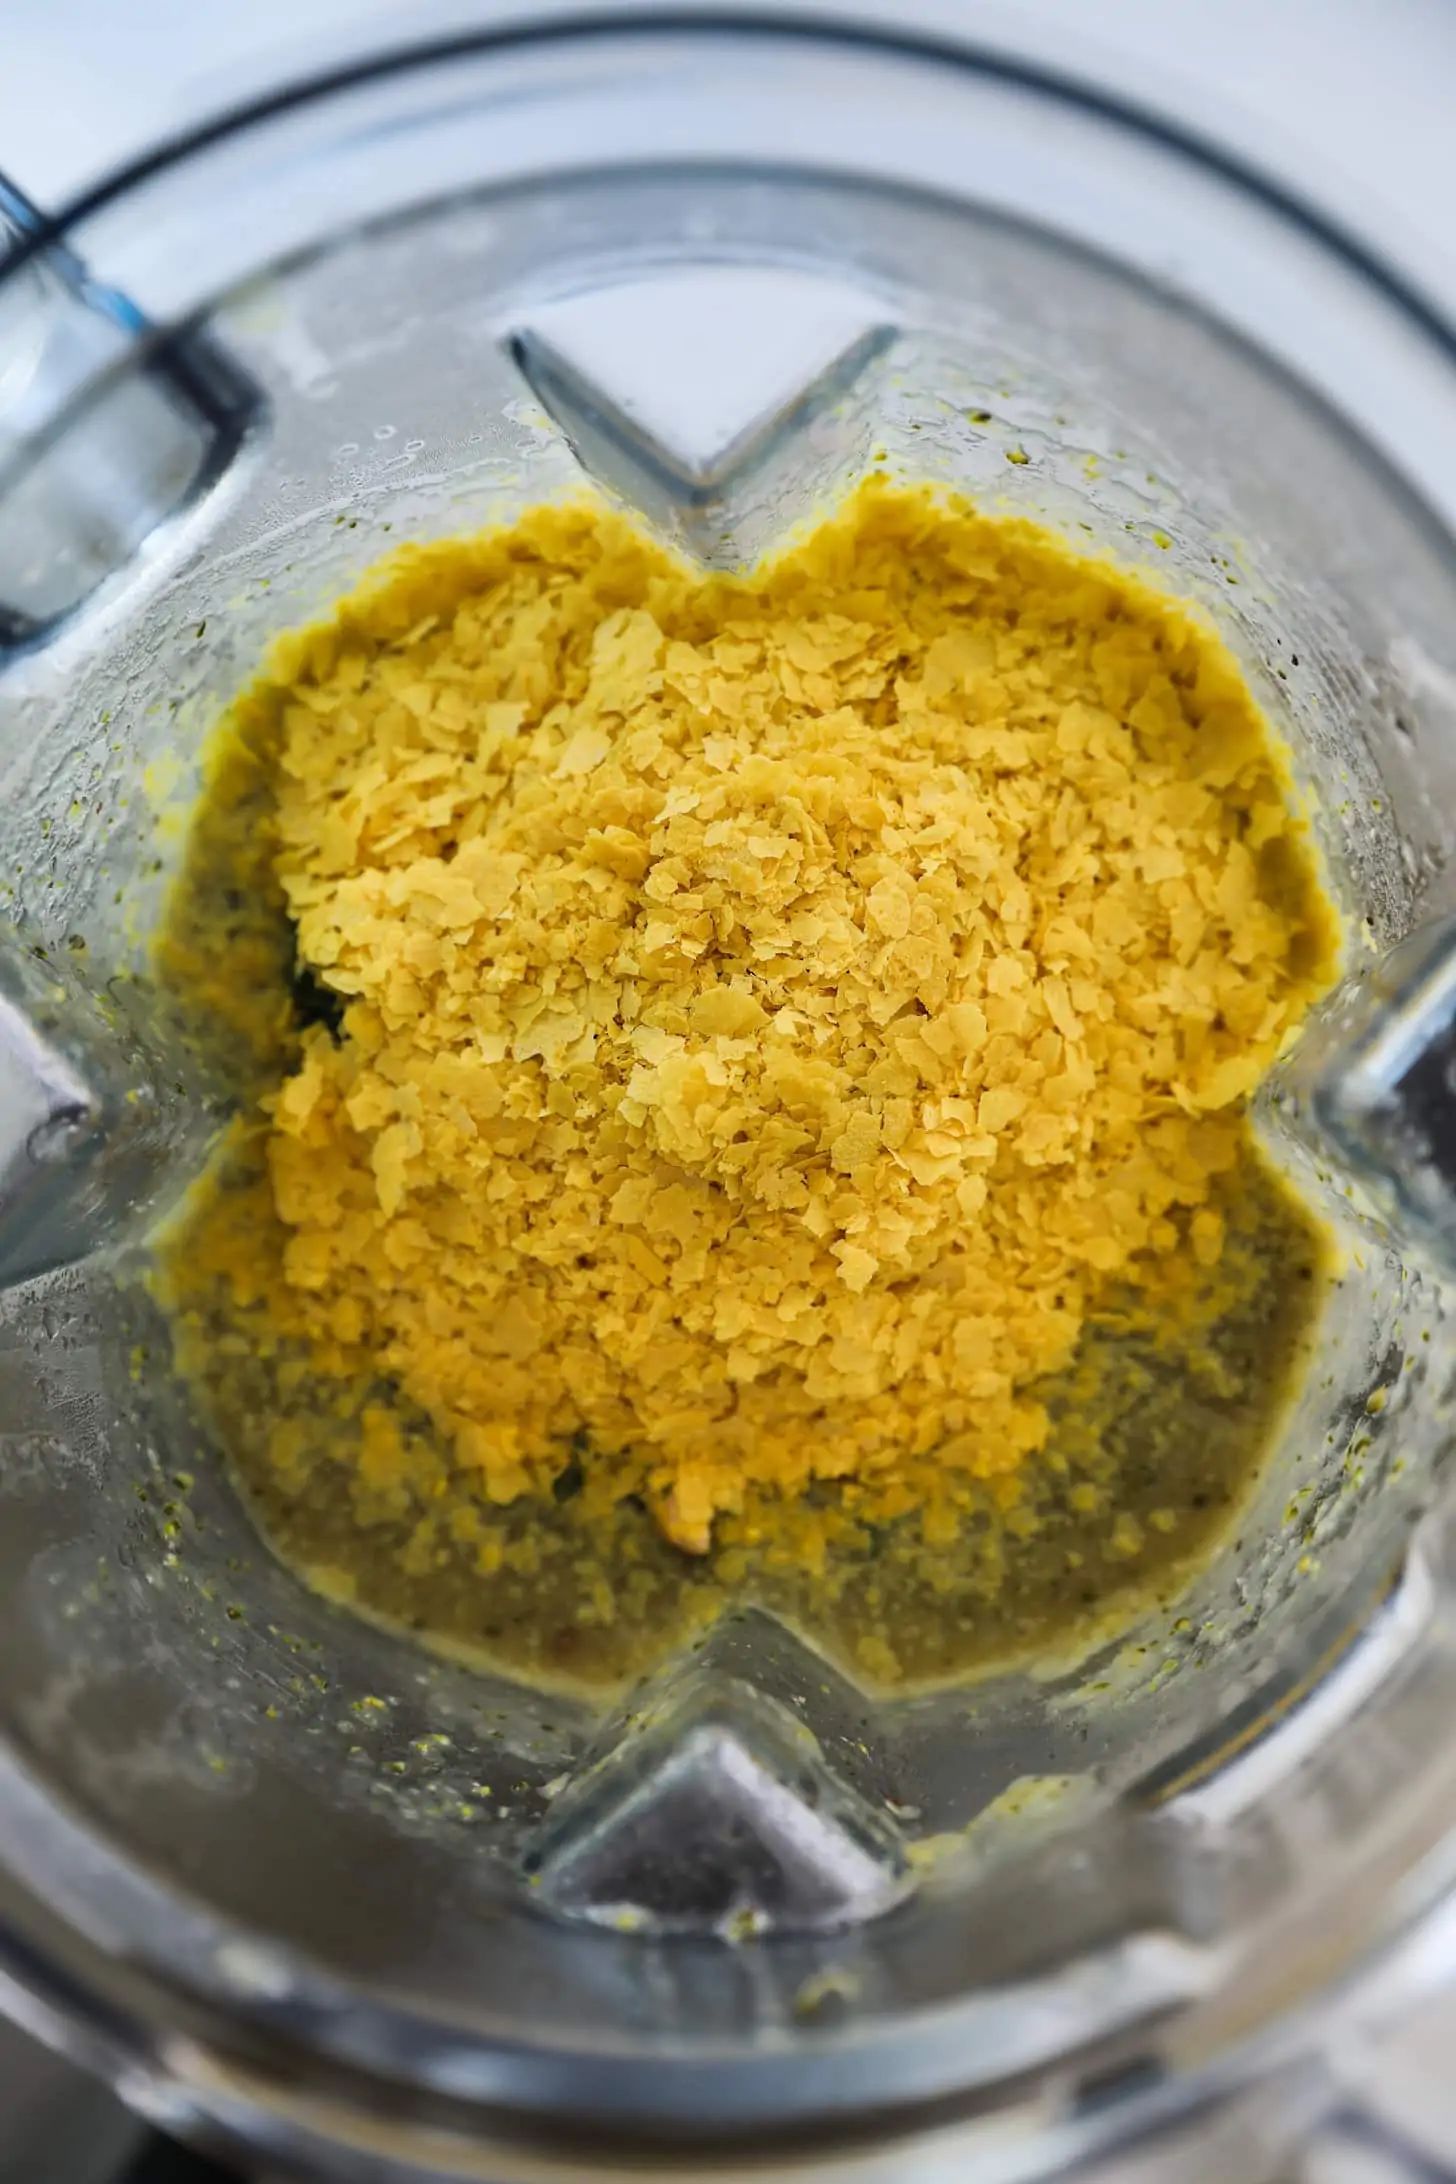 Birdseye view of a blender with yellow flakes.